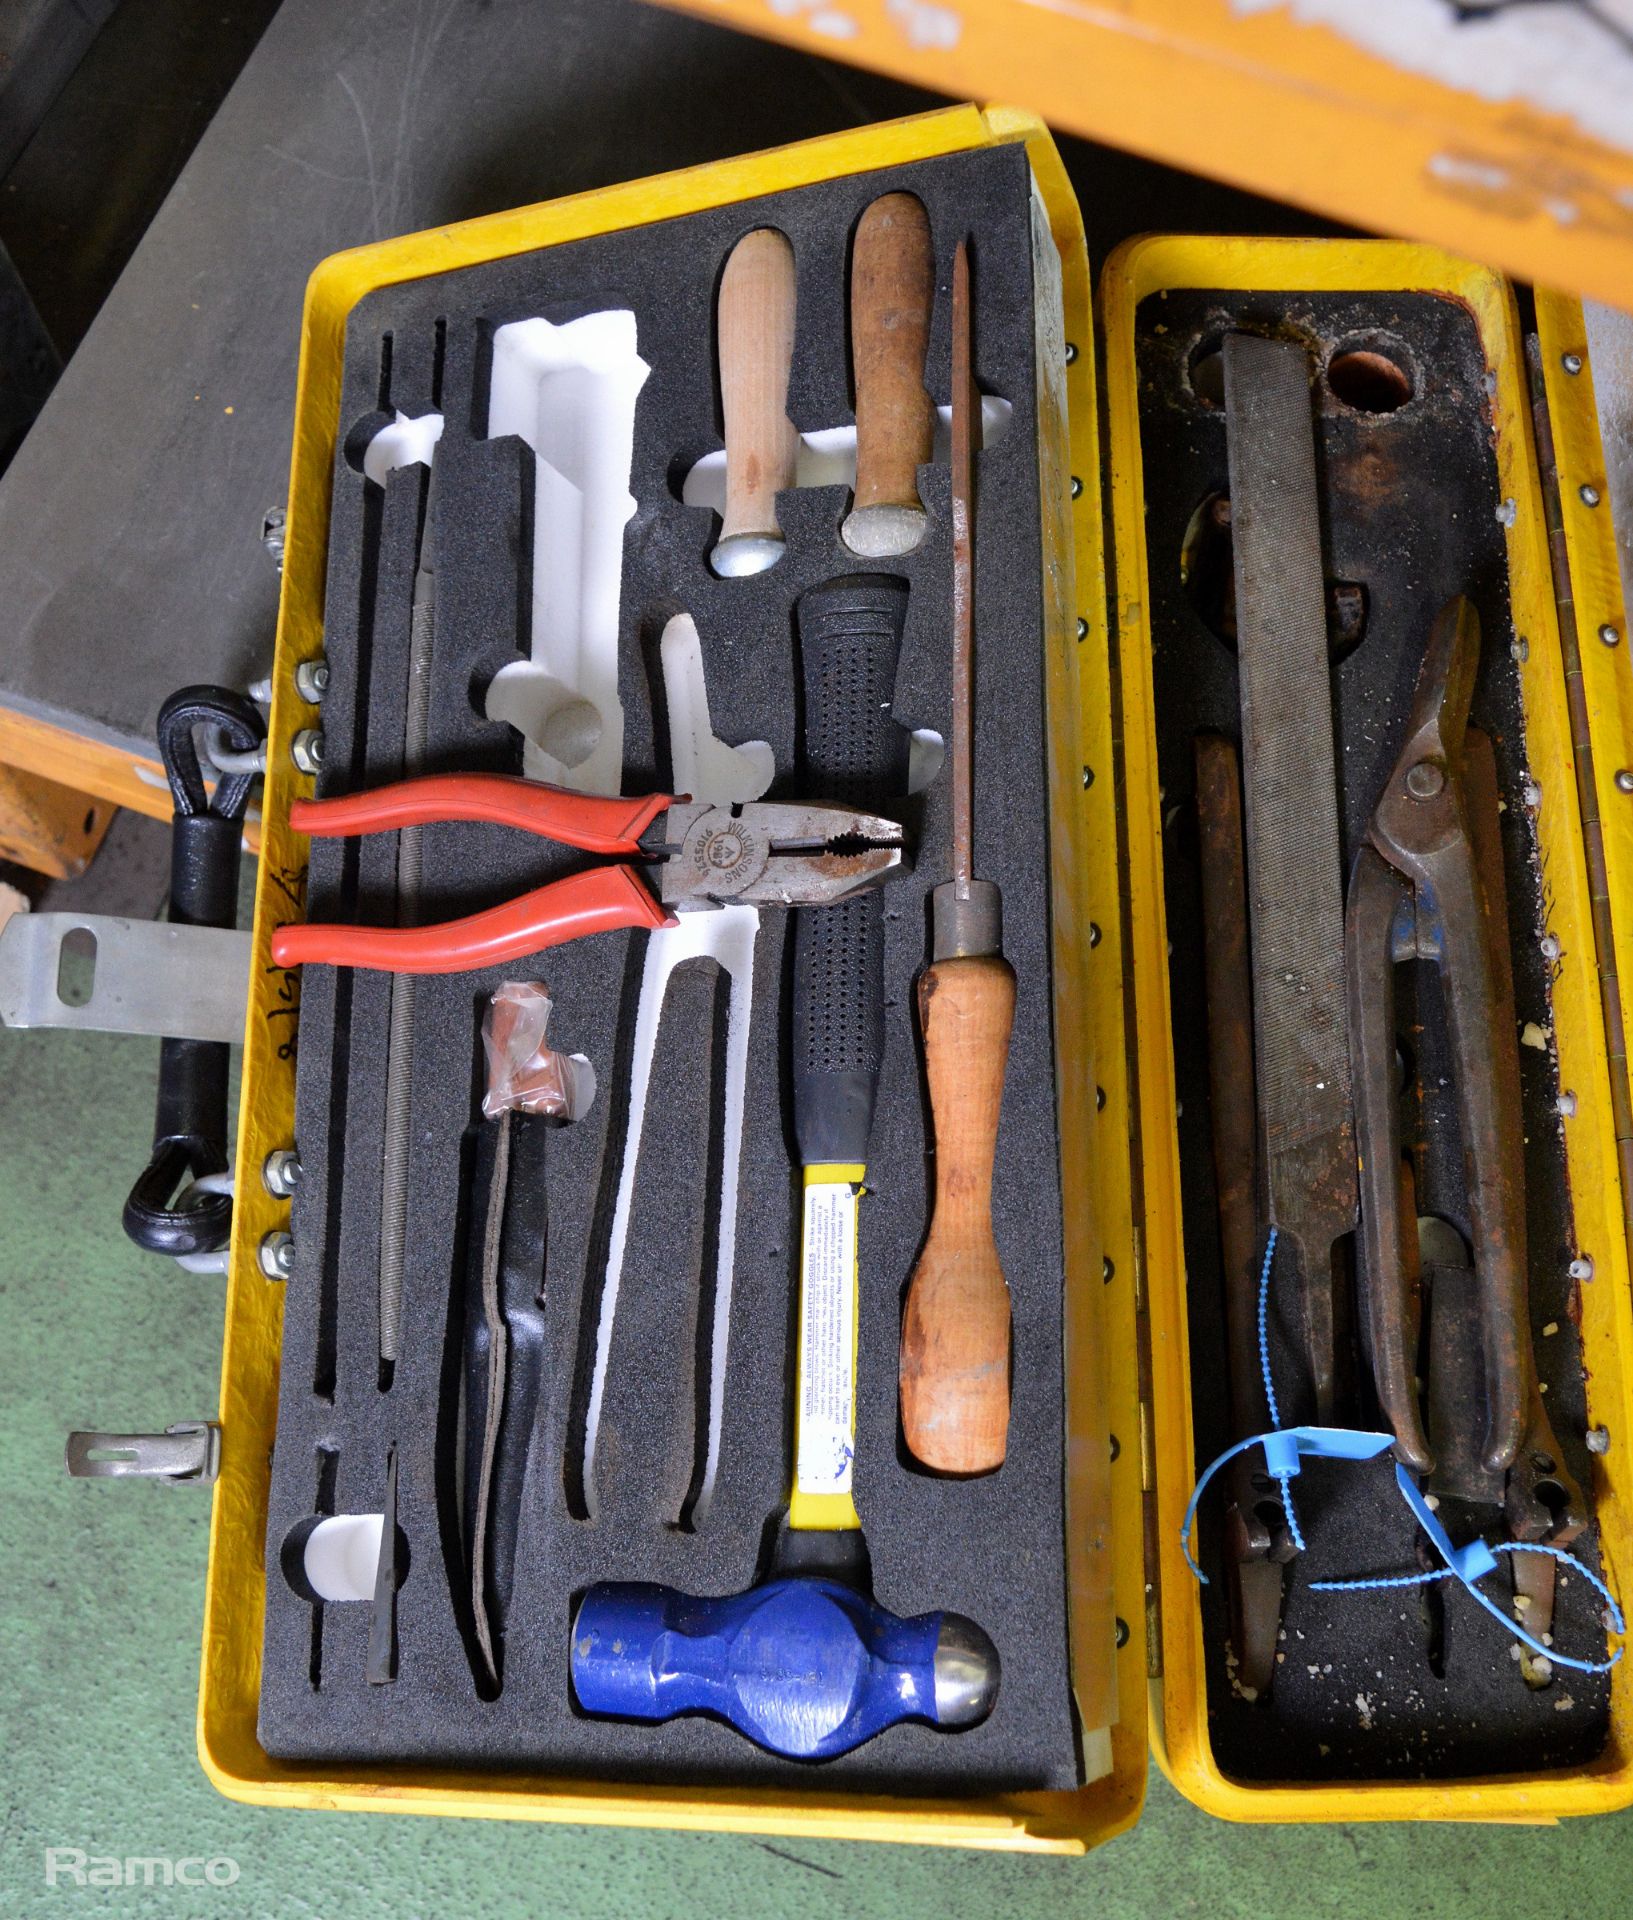 Tool Box With Various Mechanic Tools - Image 2 of 5